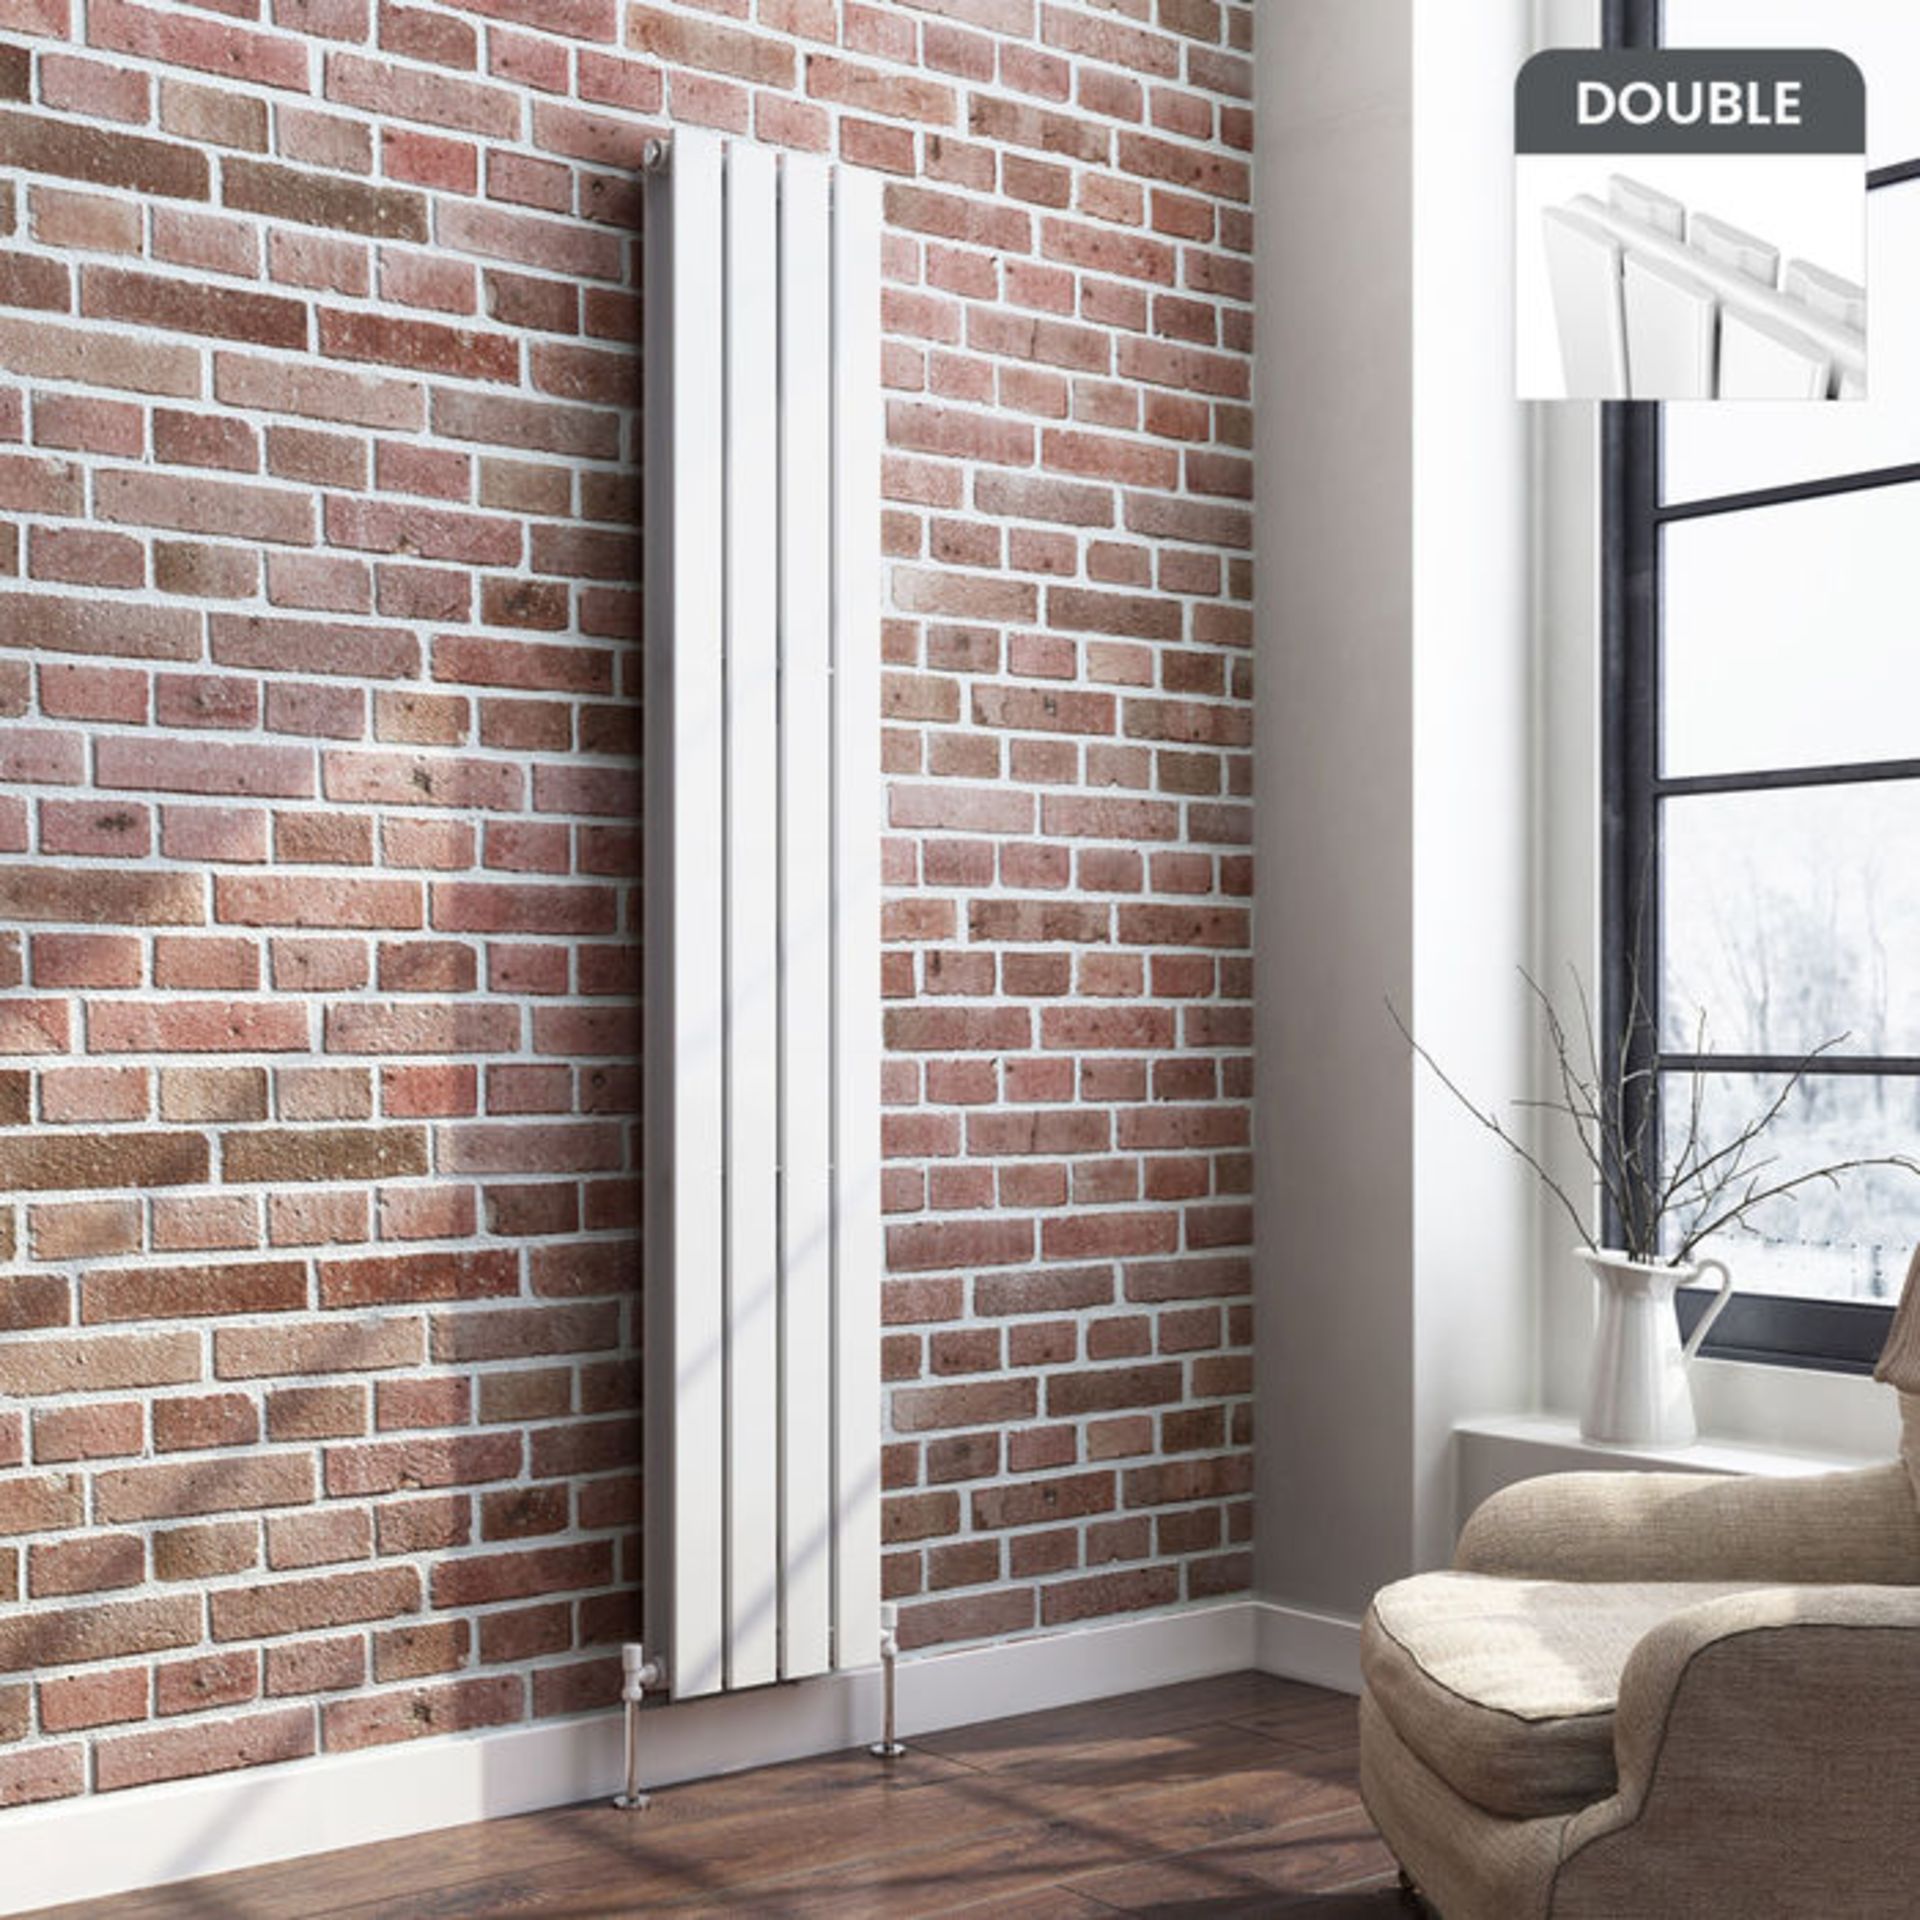 (GR205) 1800x300mm Gloss White Double Flat Panel Vertical Radiator. RRP £399.99. Made with low